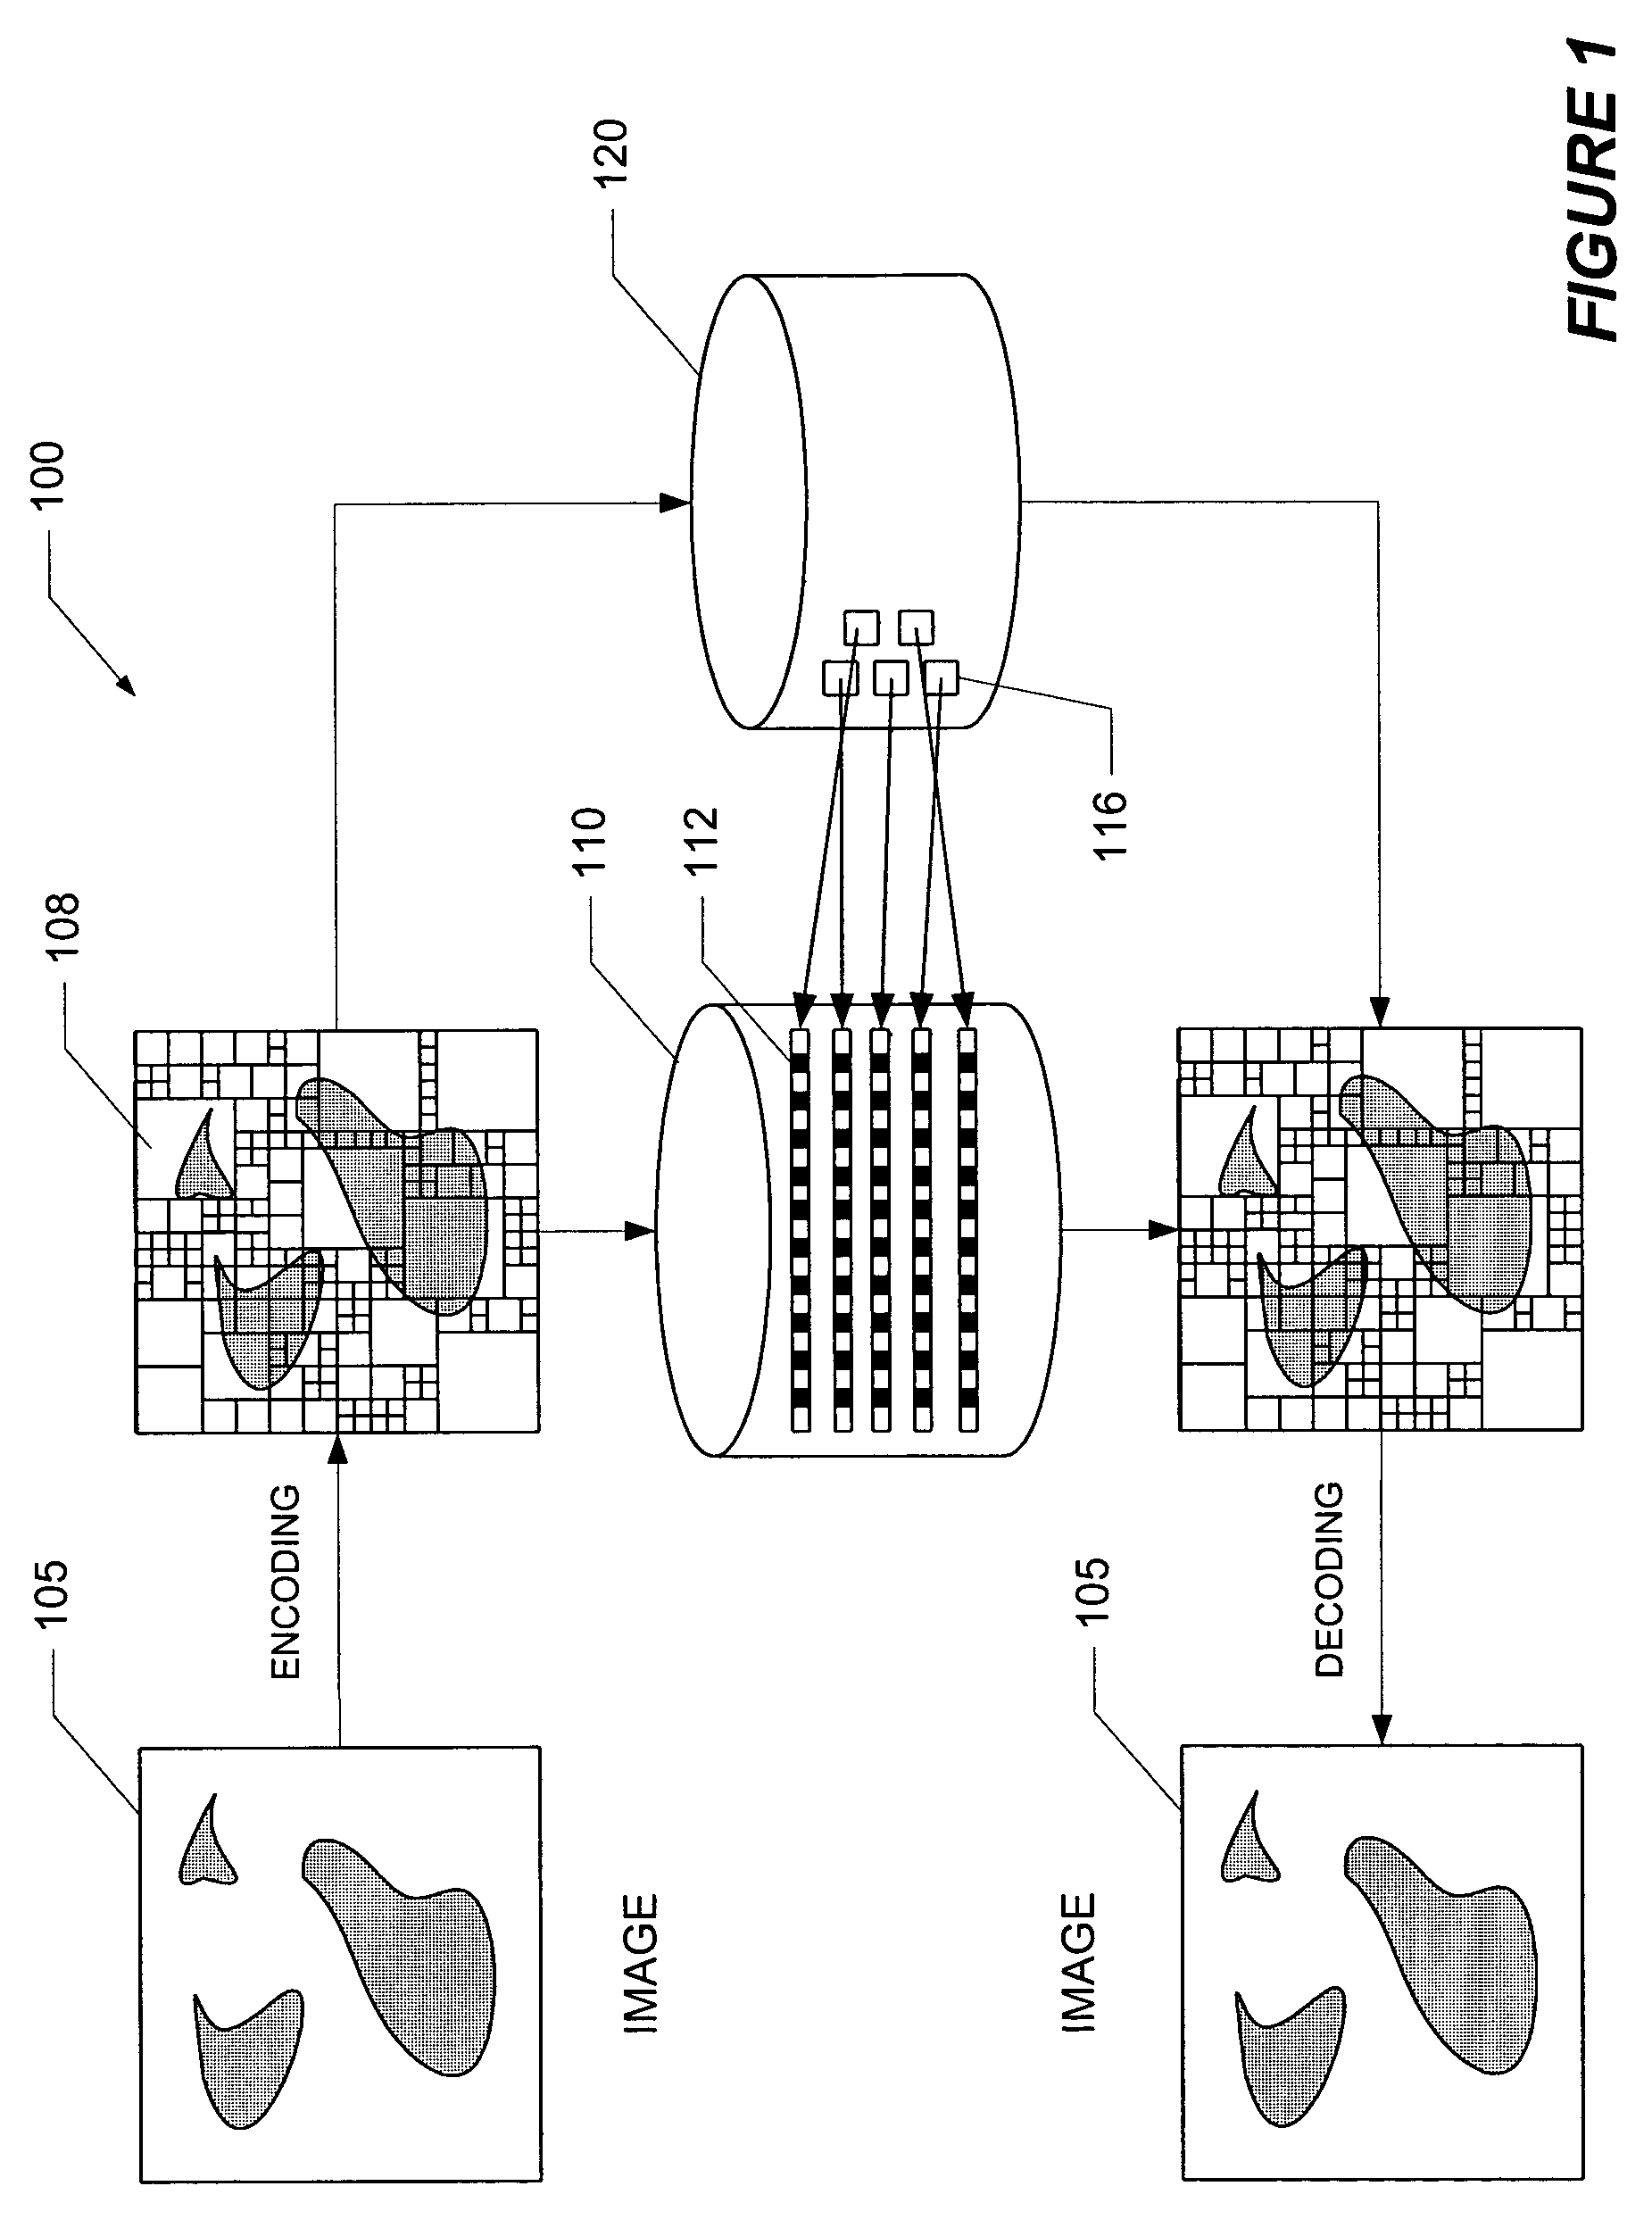 Systems and methods for image pattern recognition